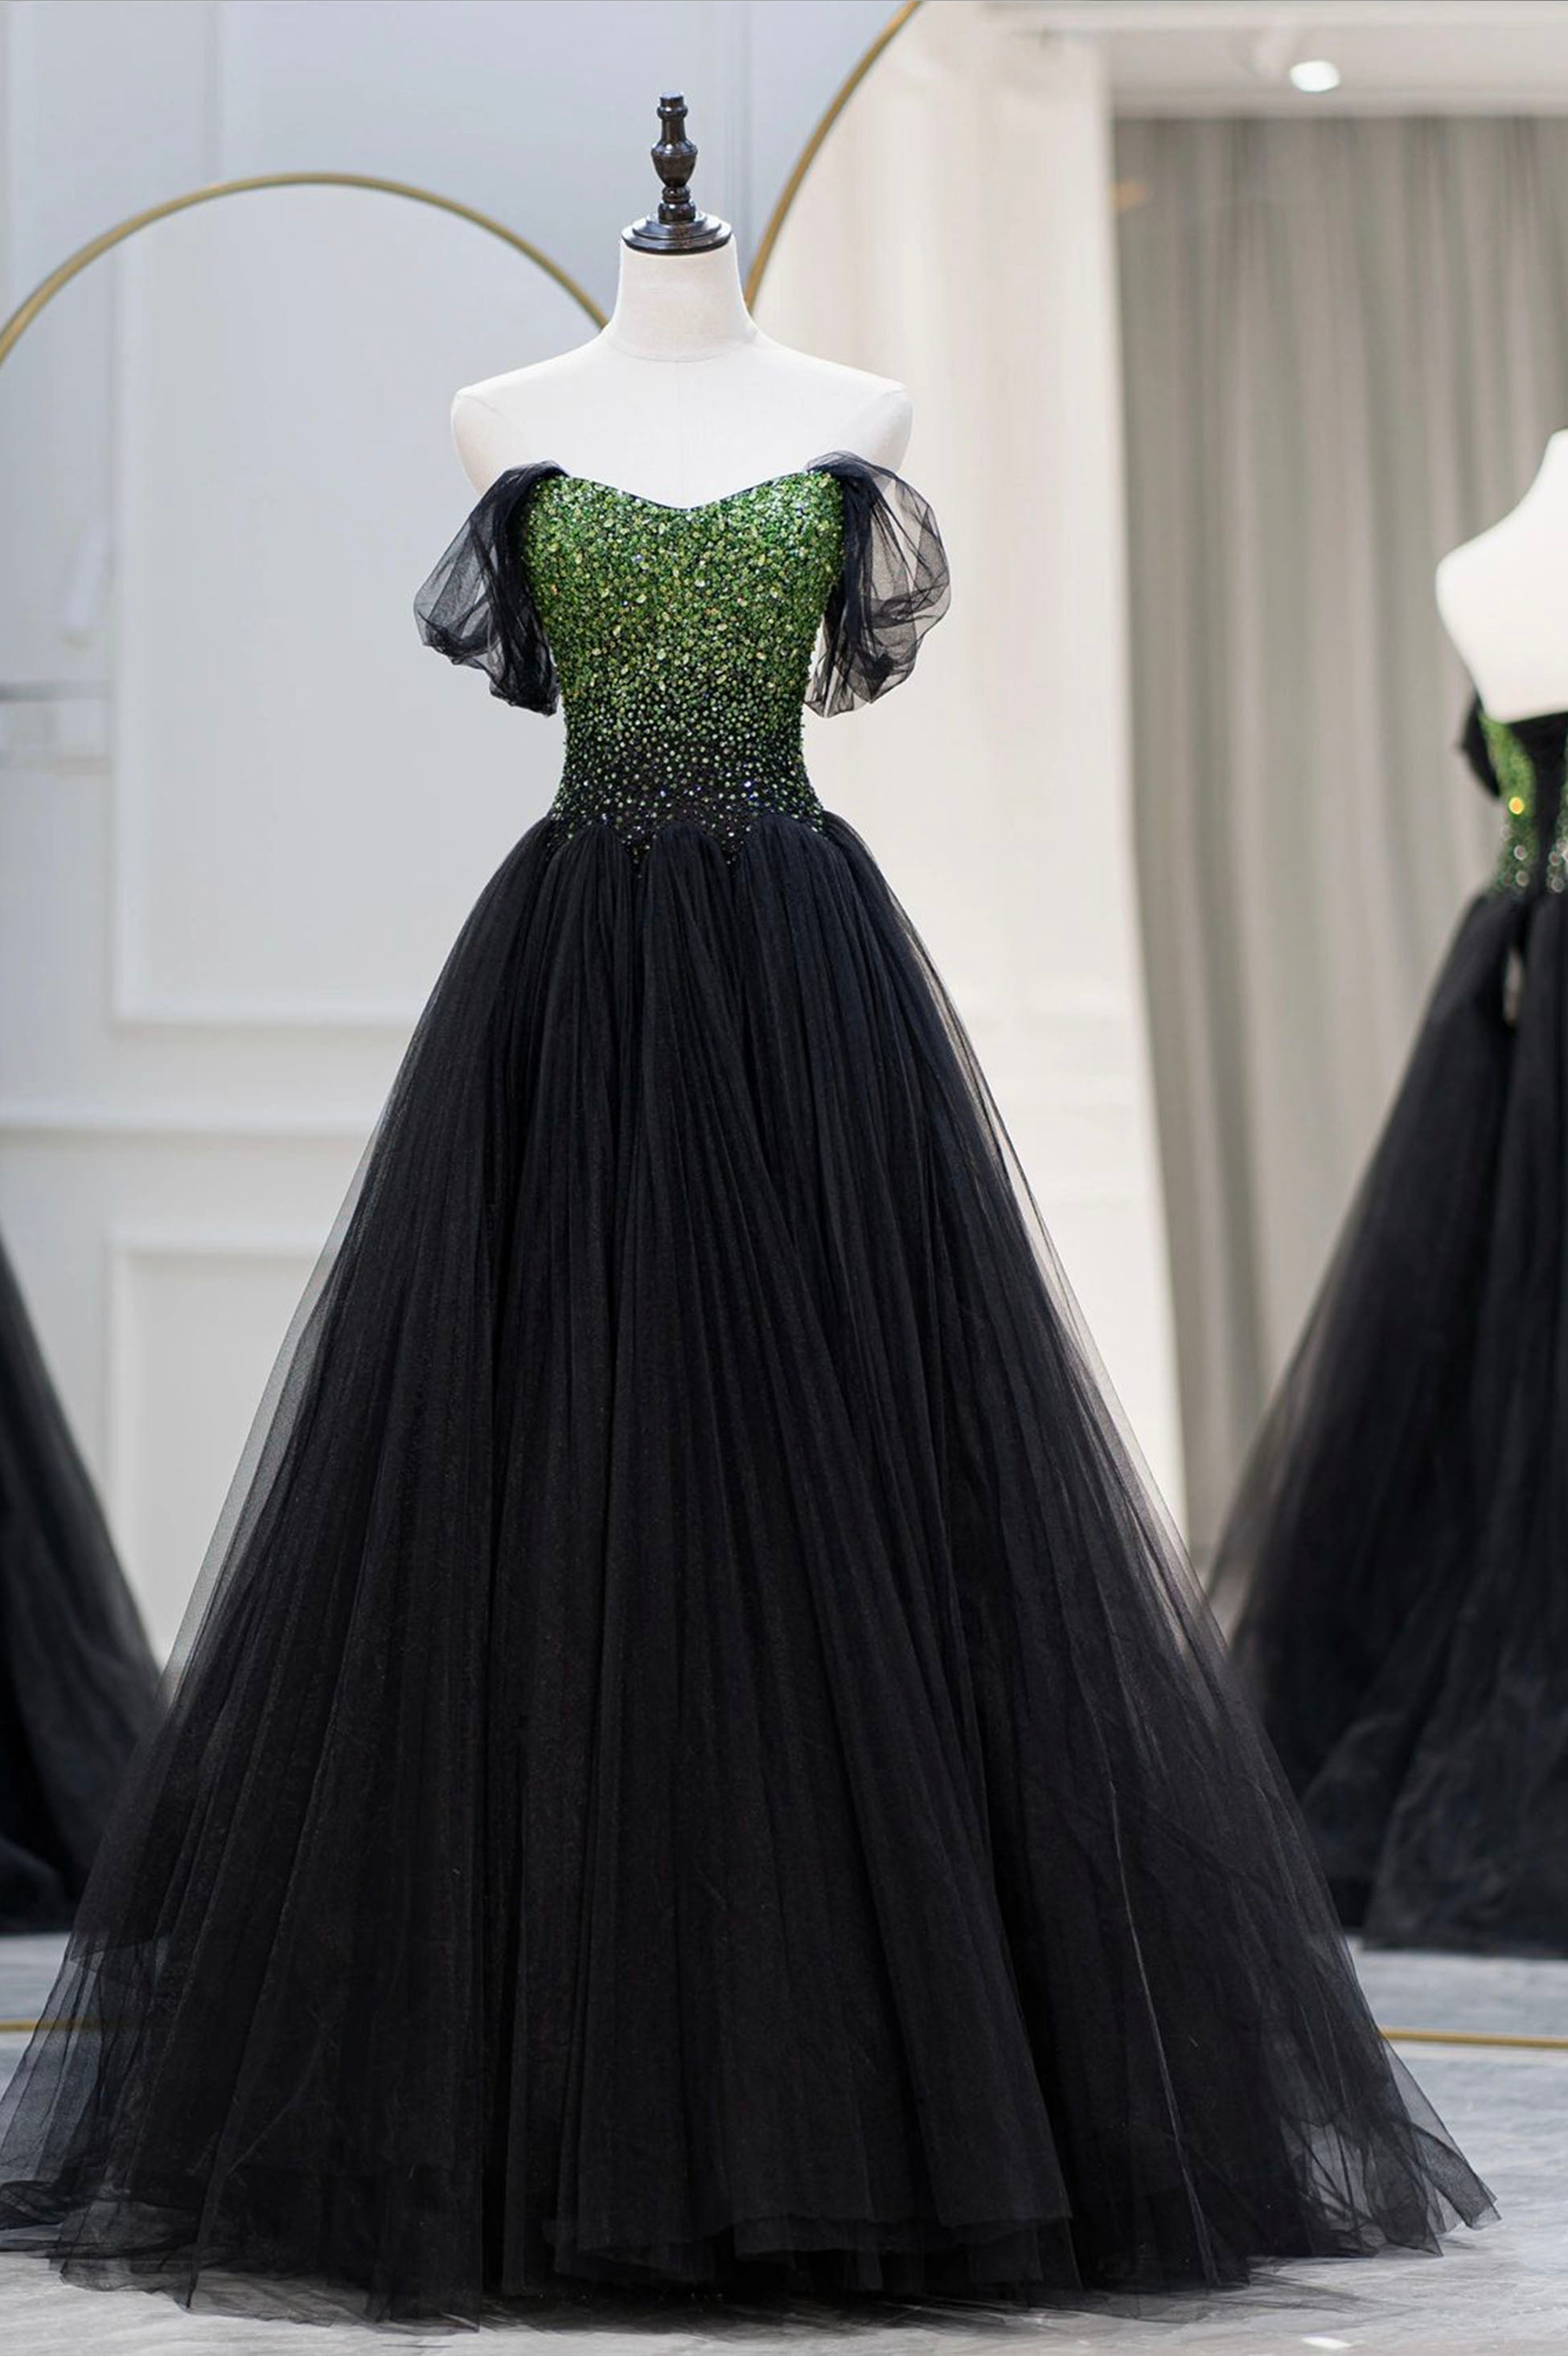 Black Tulle Long A-Line Prom Dress, Black Evening Dress with Green Beaded